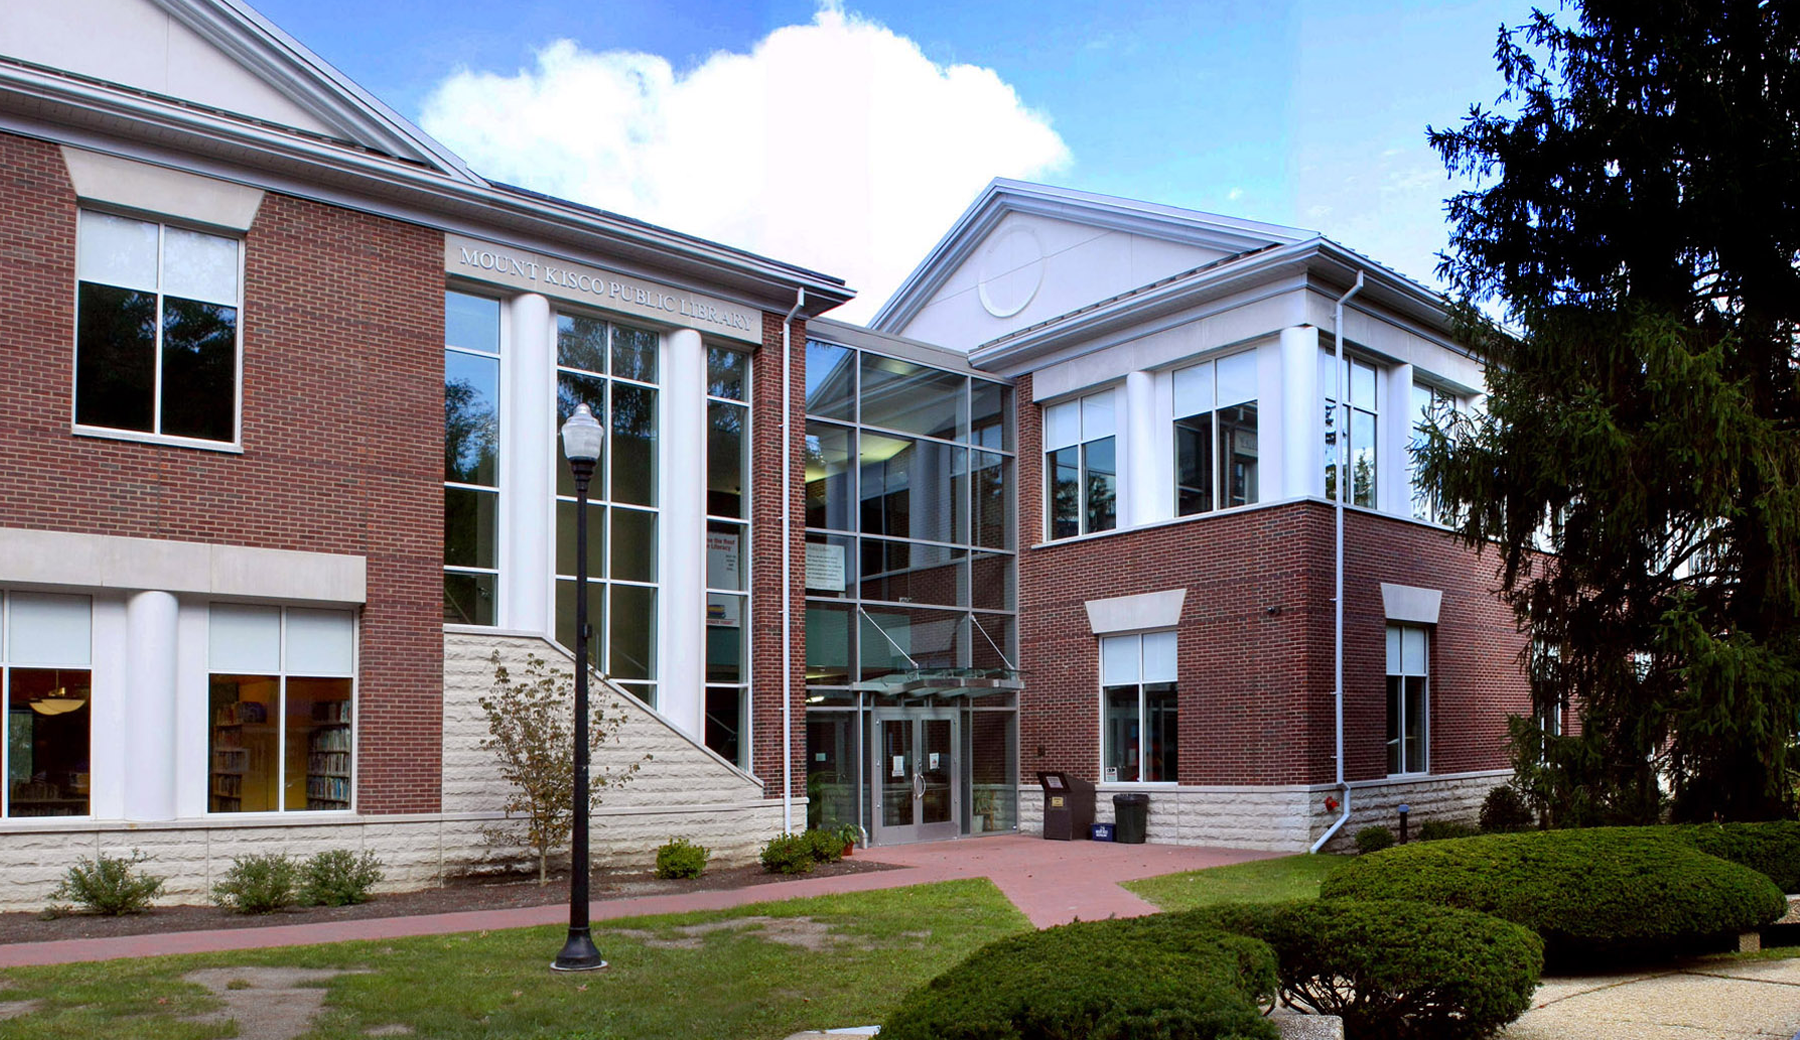 The Mount Kisco Public Library is a new 18,000 square foot Library building with a geothermal heating system. The glass atrium entrance (above) has direct access into the children’s library, and community room reading room.